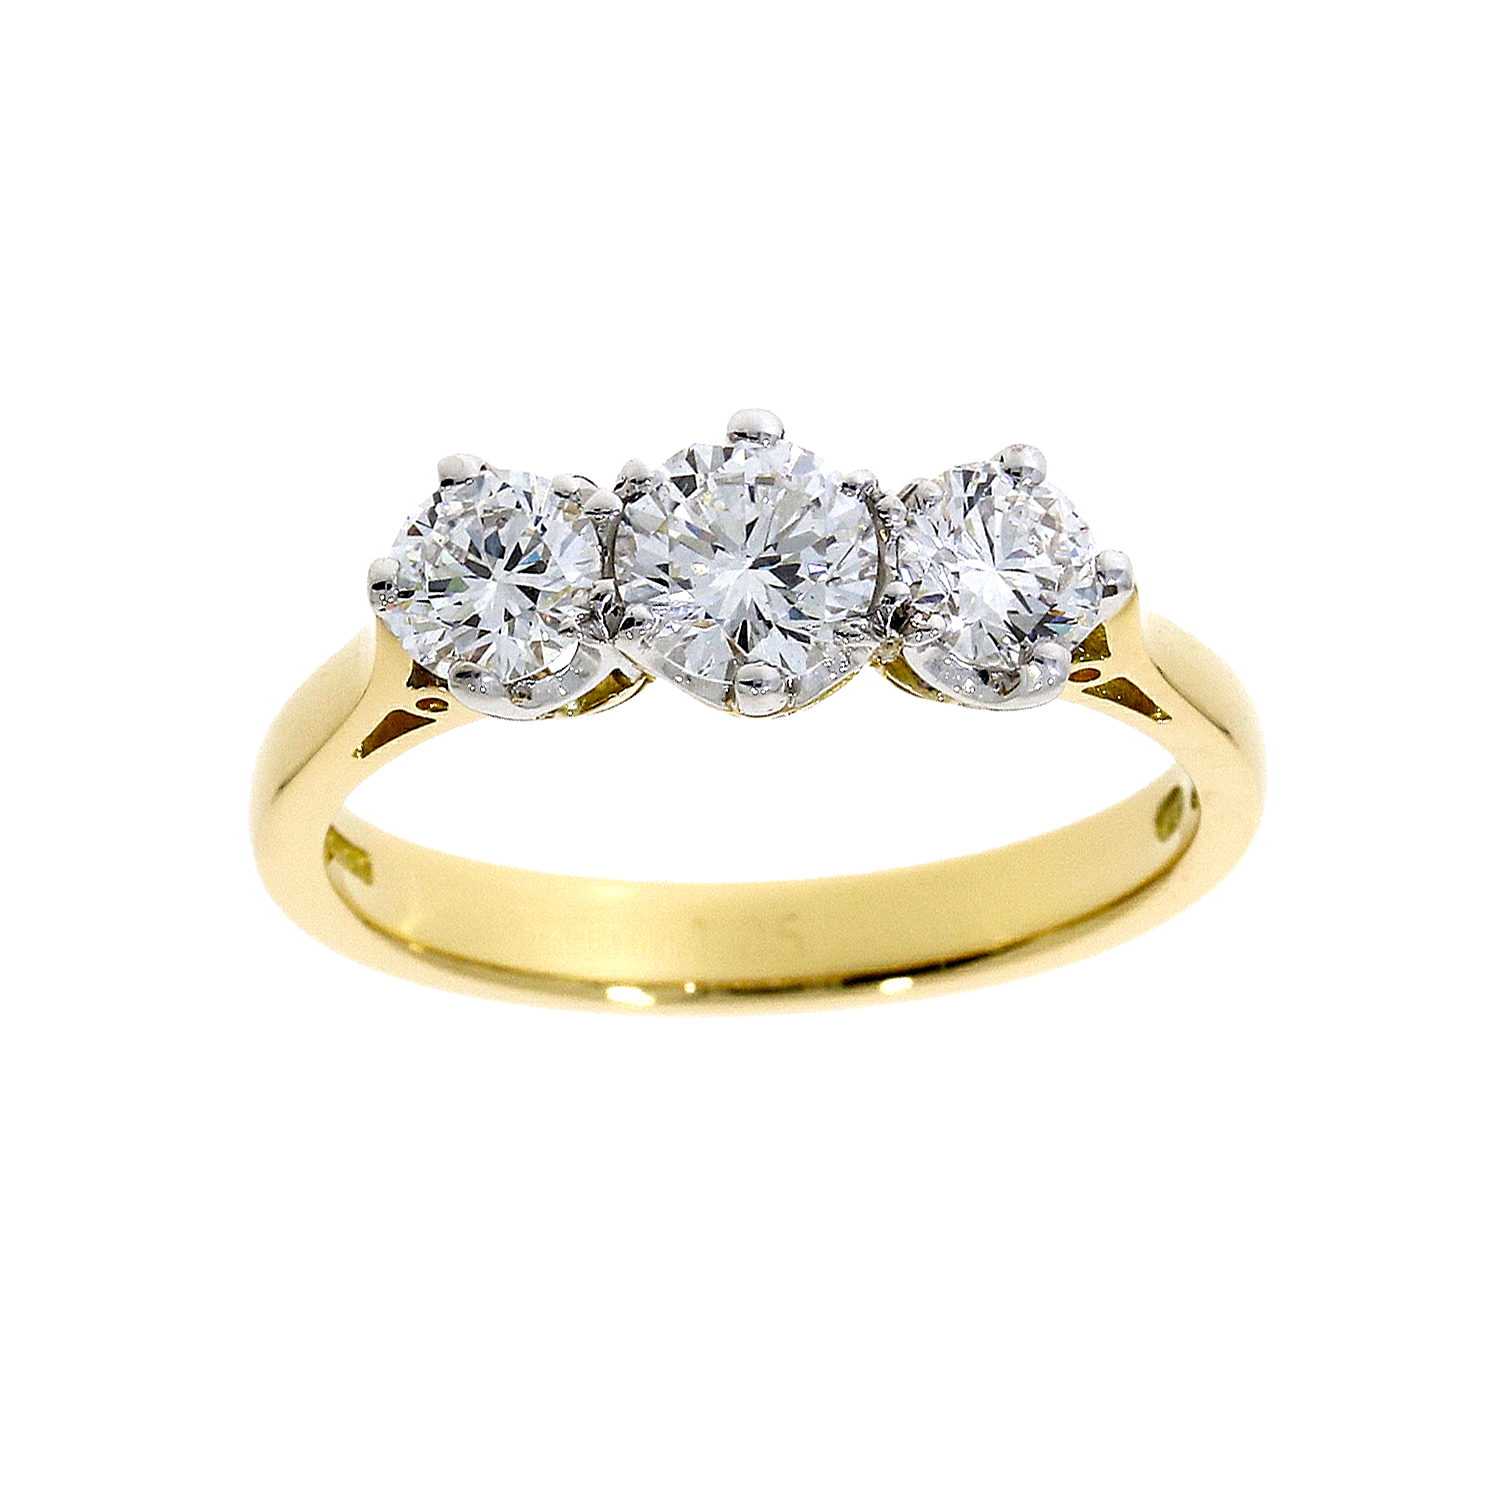 Versailles - 18ct. Yellow Gold 3-Stone Diamond Engagement Ring - 0.75cts